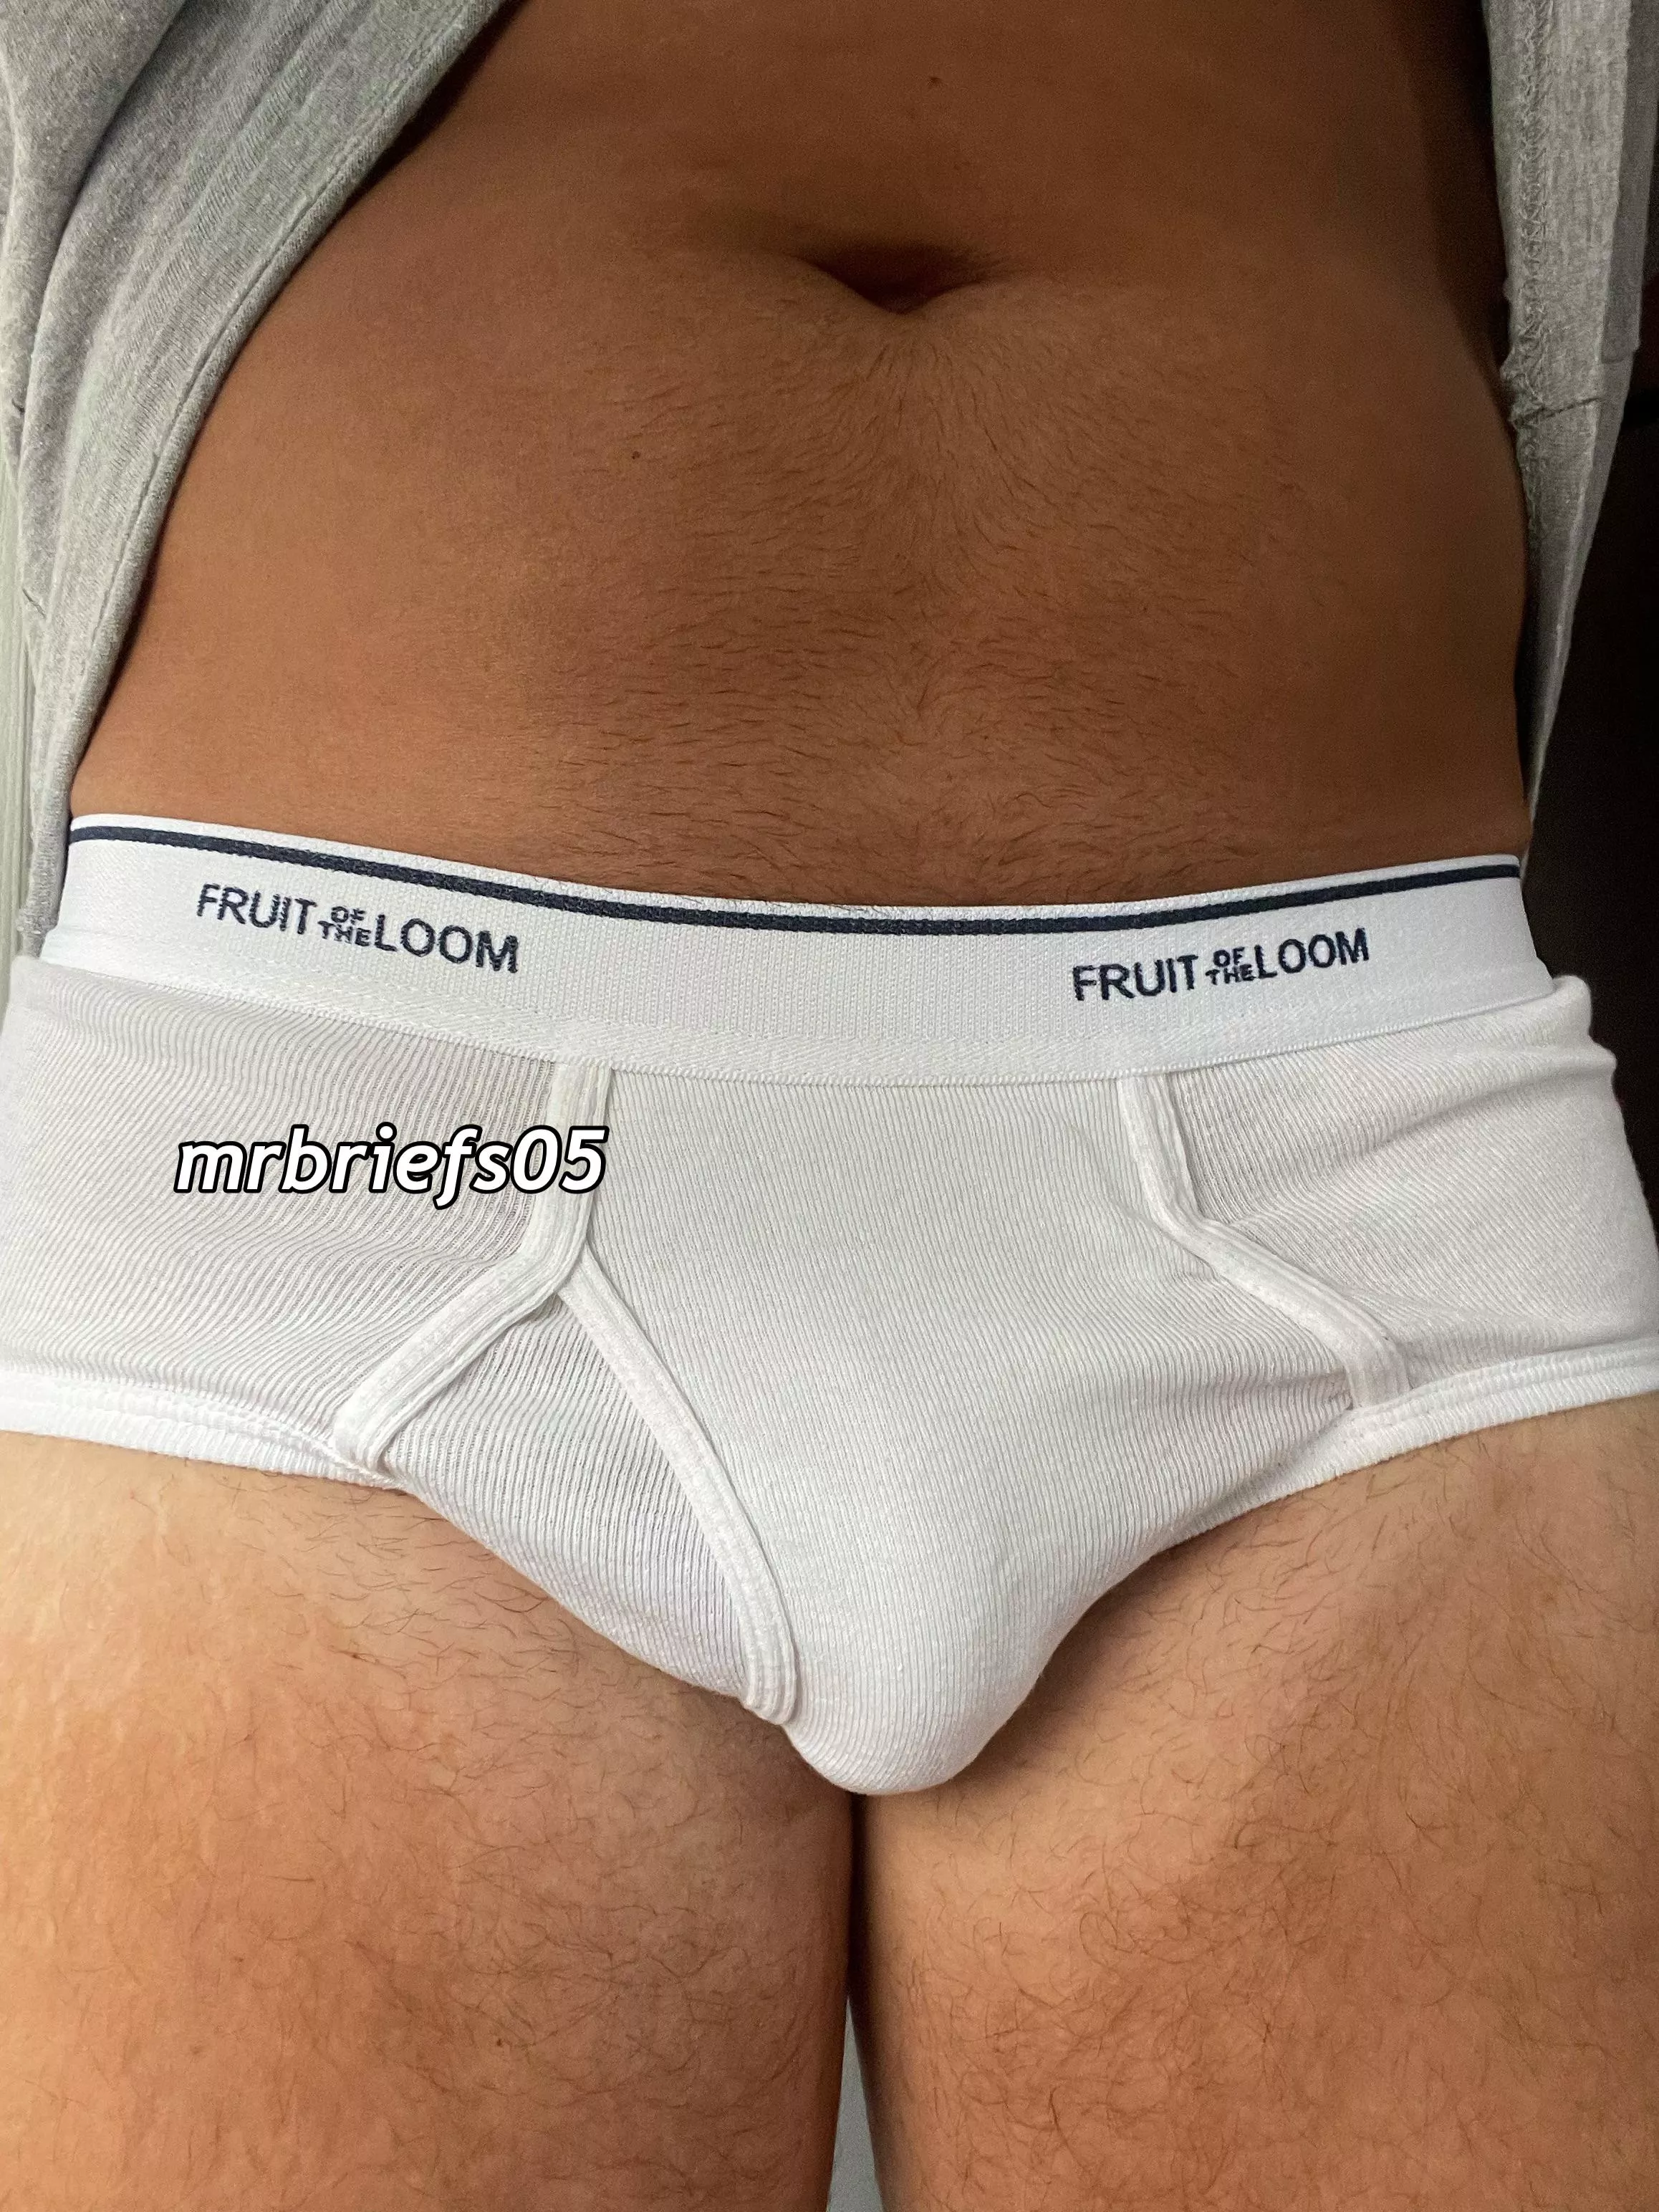 Panty Fruit - Let's Not Forget About Fruit Of The Loom Friday! ðŸ˜ nudes : Bulges |  NUDE-PICS.ORG